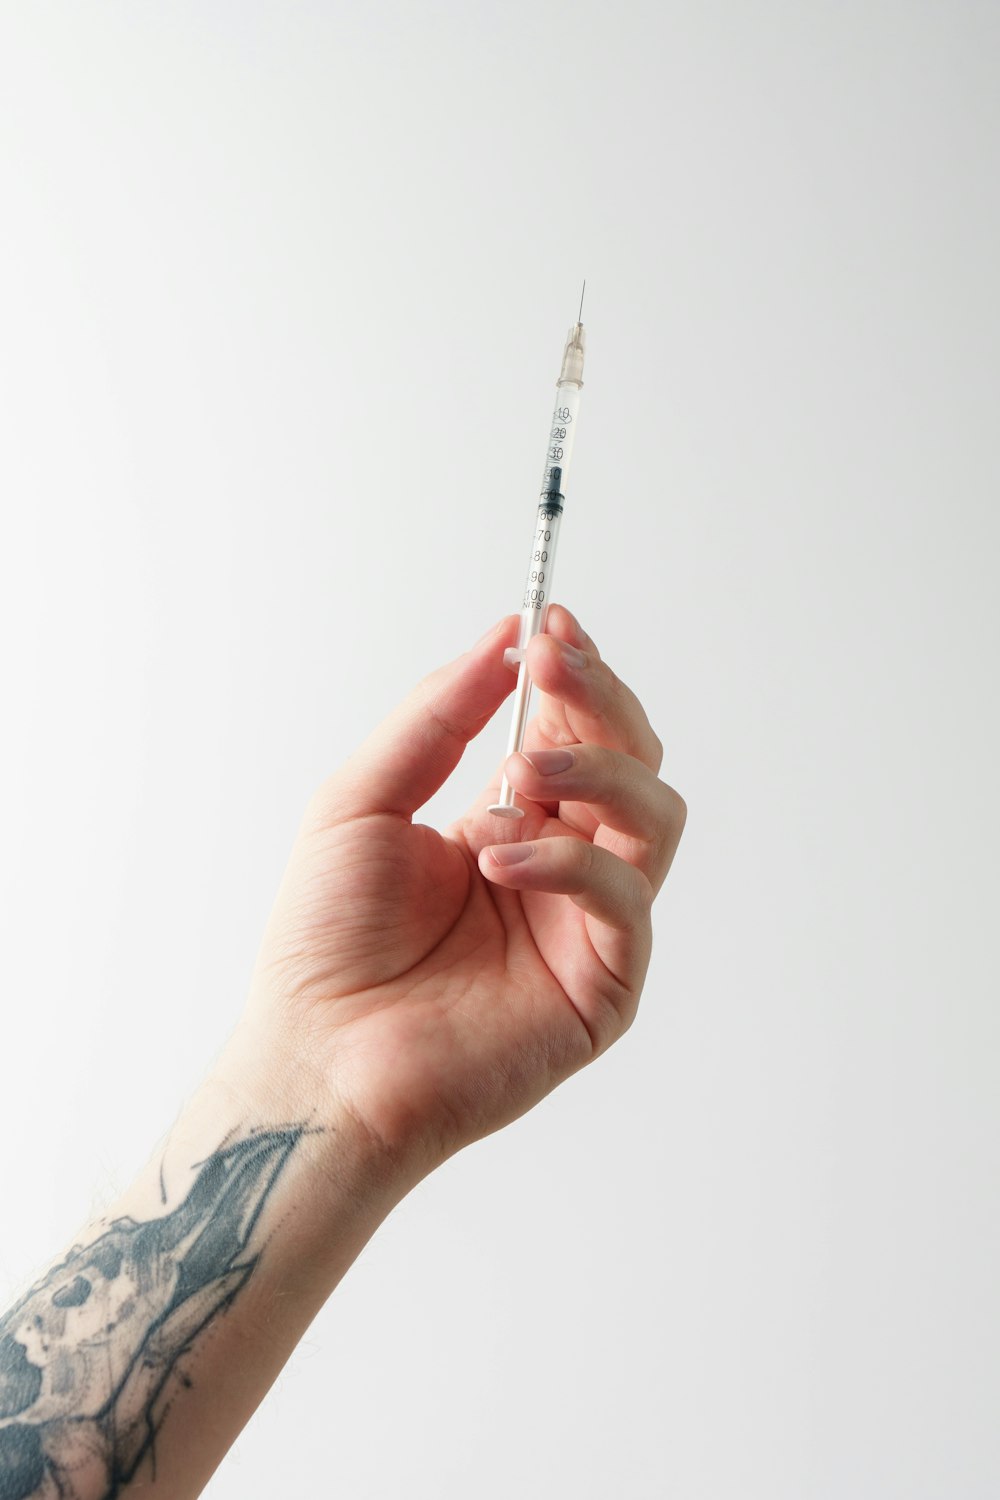 a person holding a needle